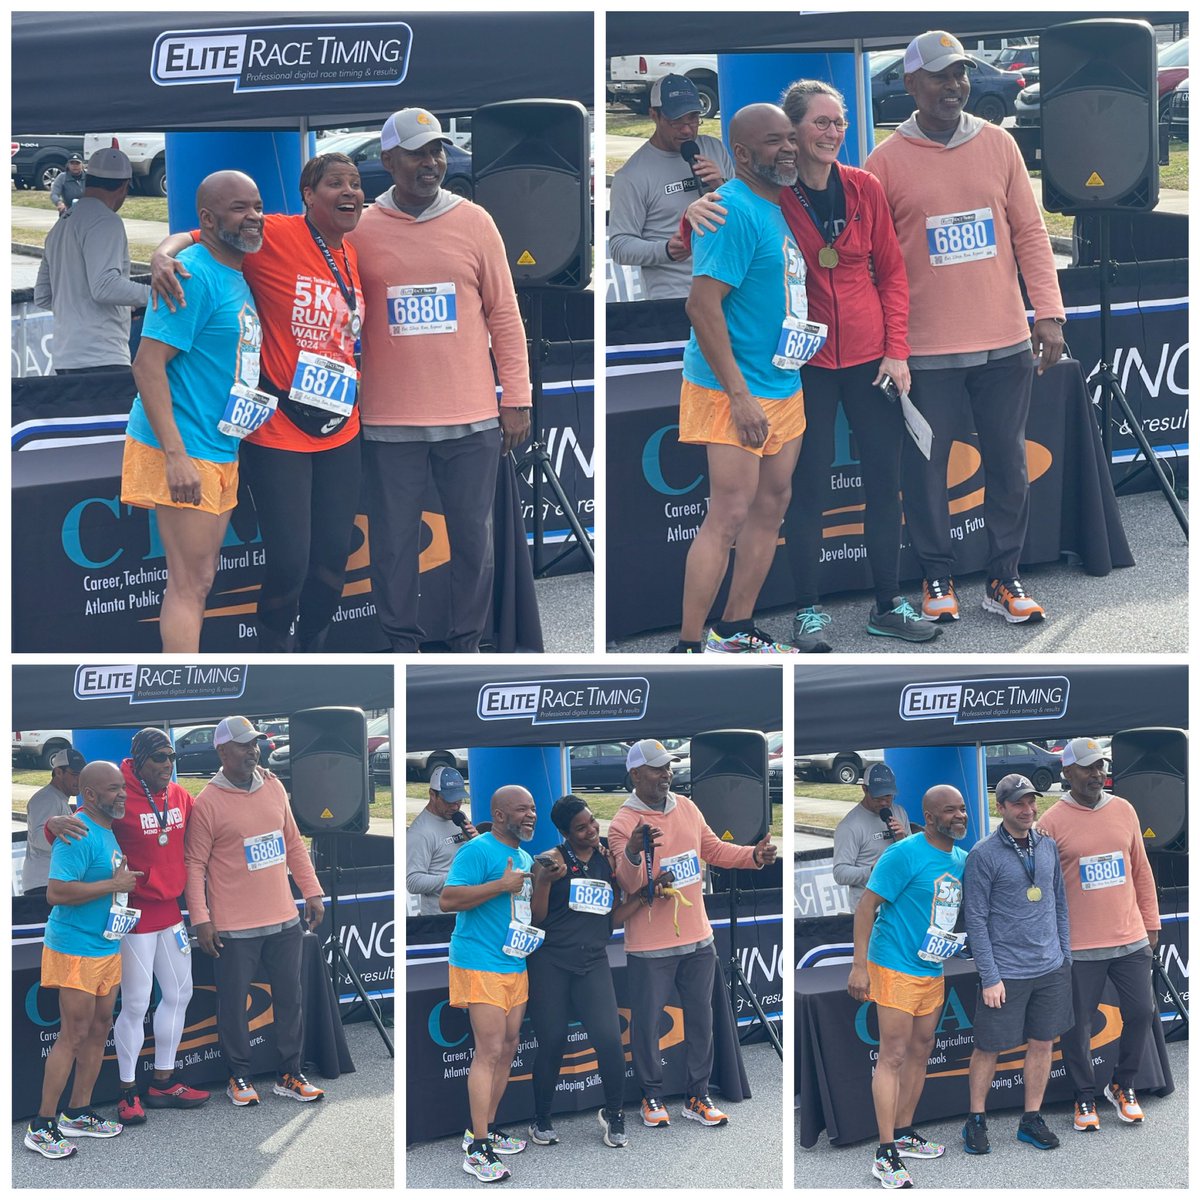 Started my Saturday morning supporting @ctae_in_aps in their first 5K race🏃🏾‍♂️🏃🏾‍♂️🏃🏾‍♂️! Thanks @TheoSmithJrEdD for pushing me back to 🏃🏾‍♂️🏃🏾‍♂️🏃🏾‍♂️#GoodjobTheo @APS_HPE @Myssjj @DioneDSimon @APSHAES @apsupdate